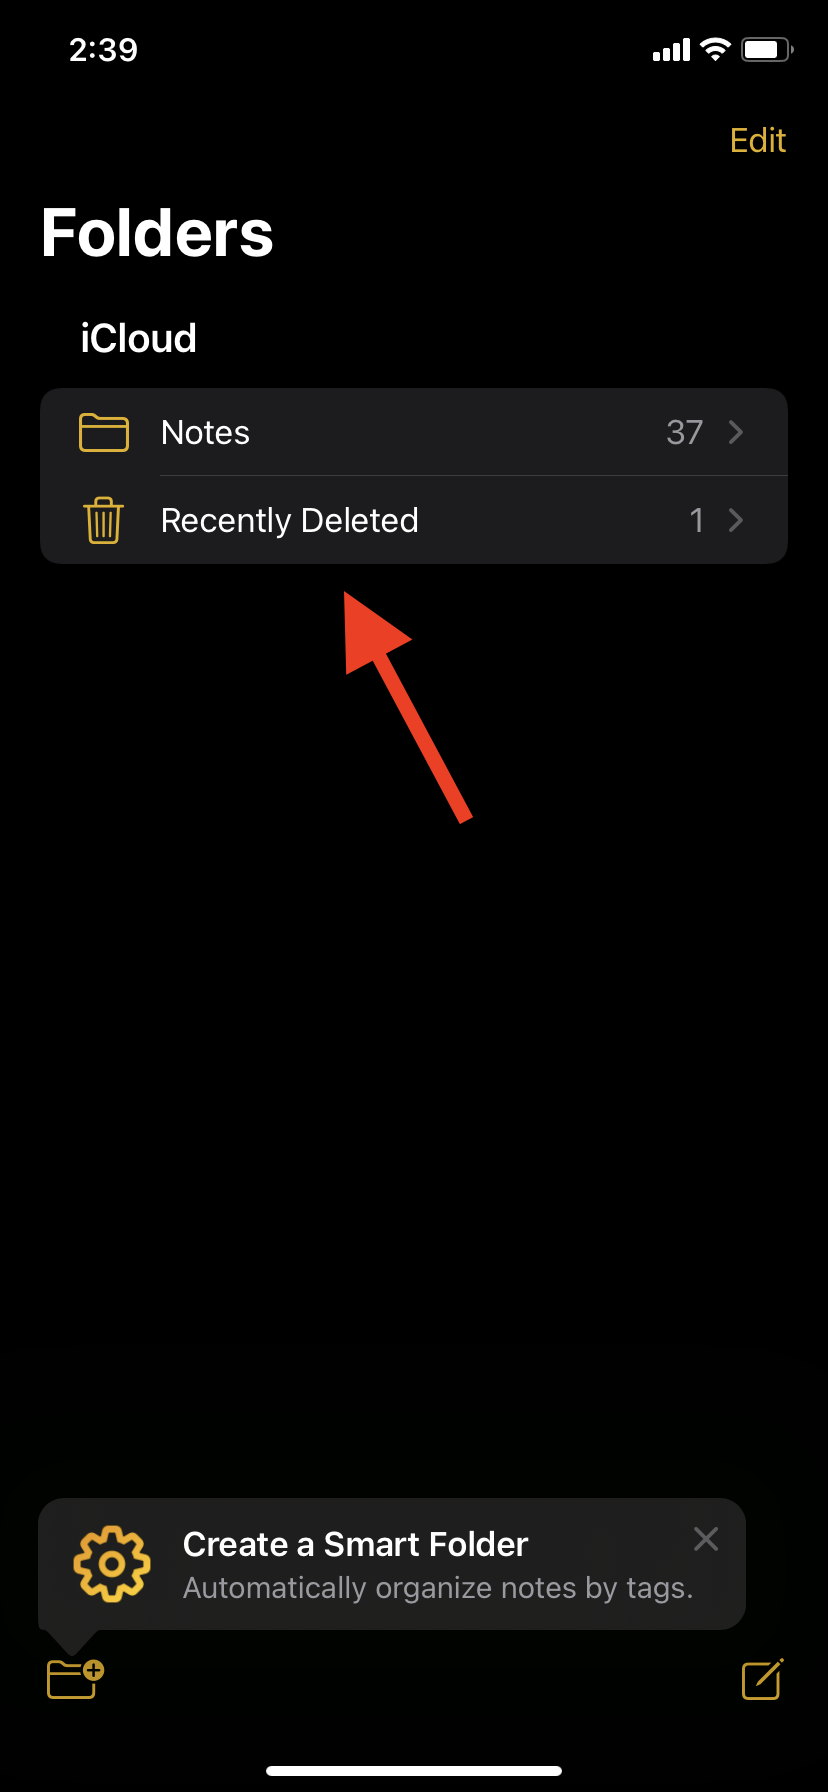 Tap on the 'Recently Deleted' folder